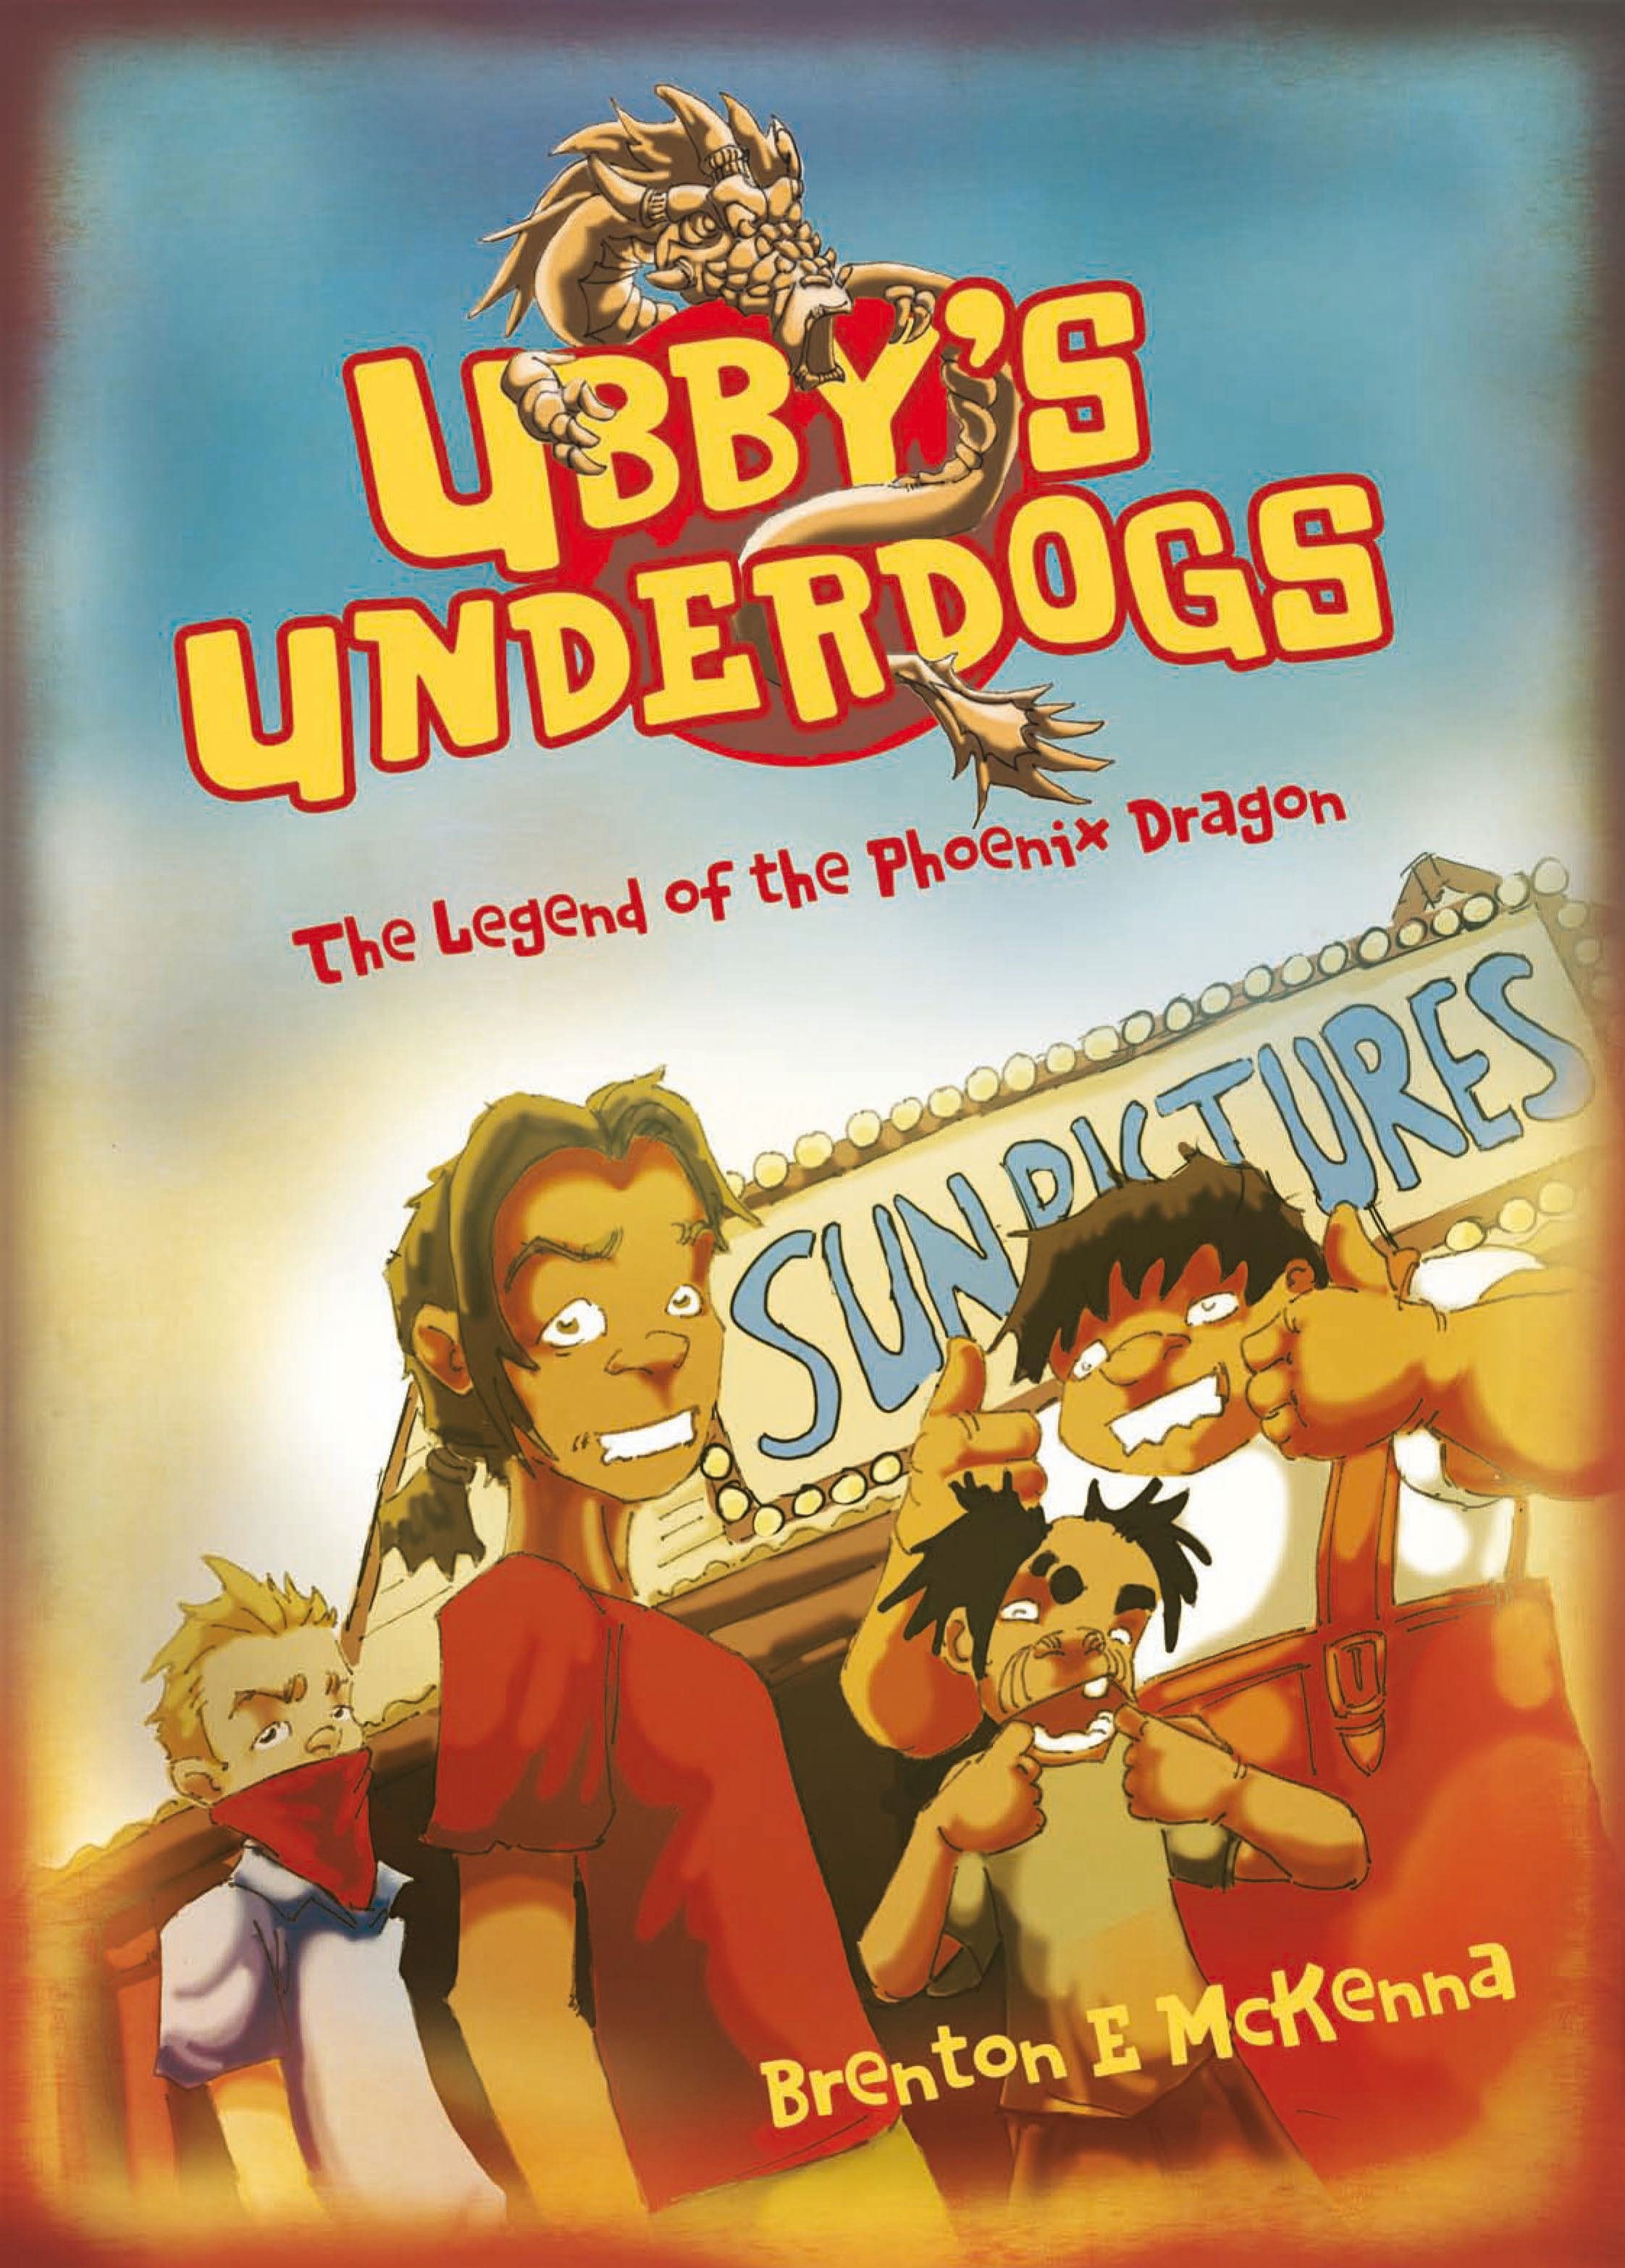 Ubby's Underdogs The Legend of the Phoenix Dragon